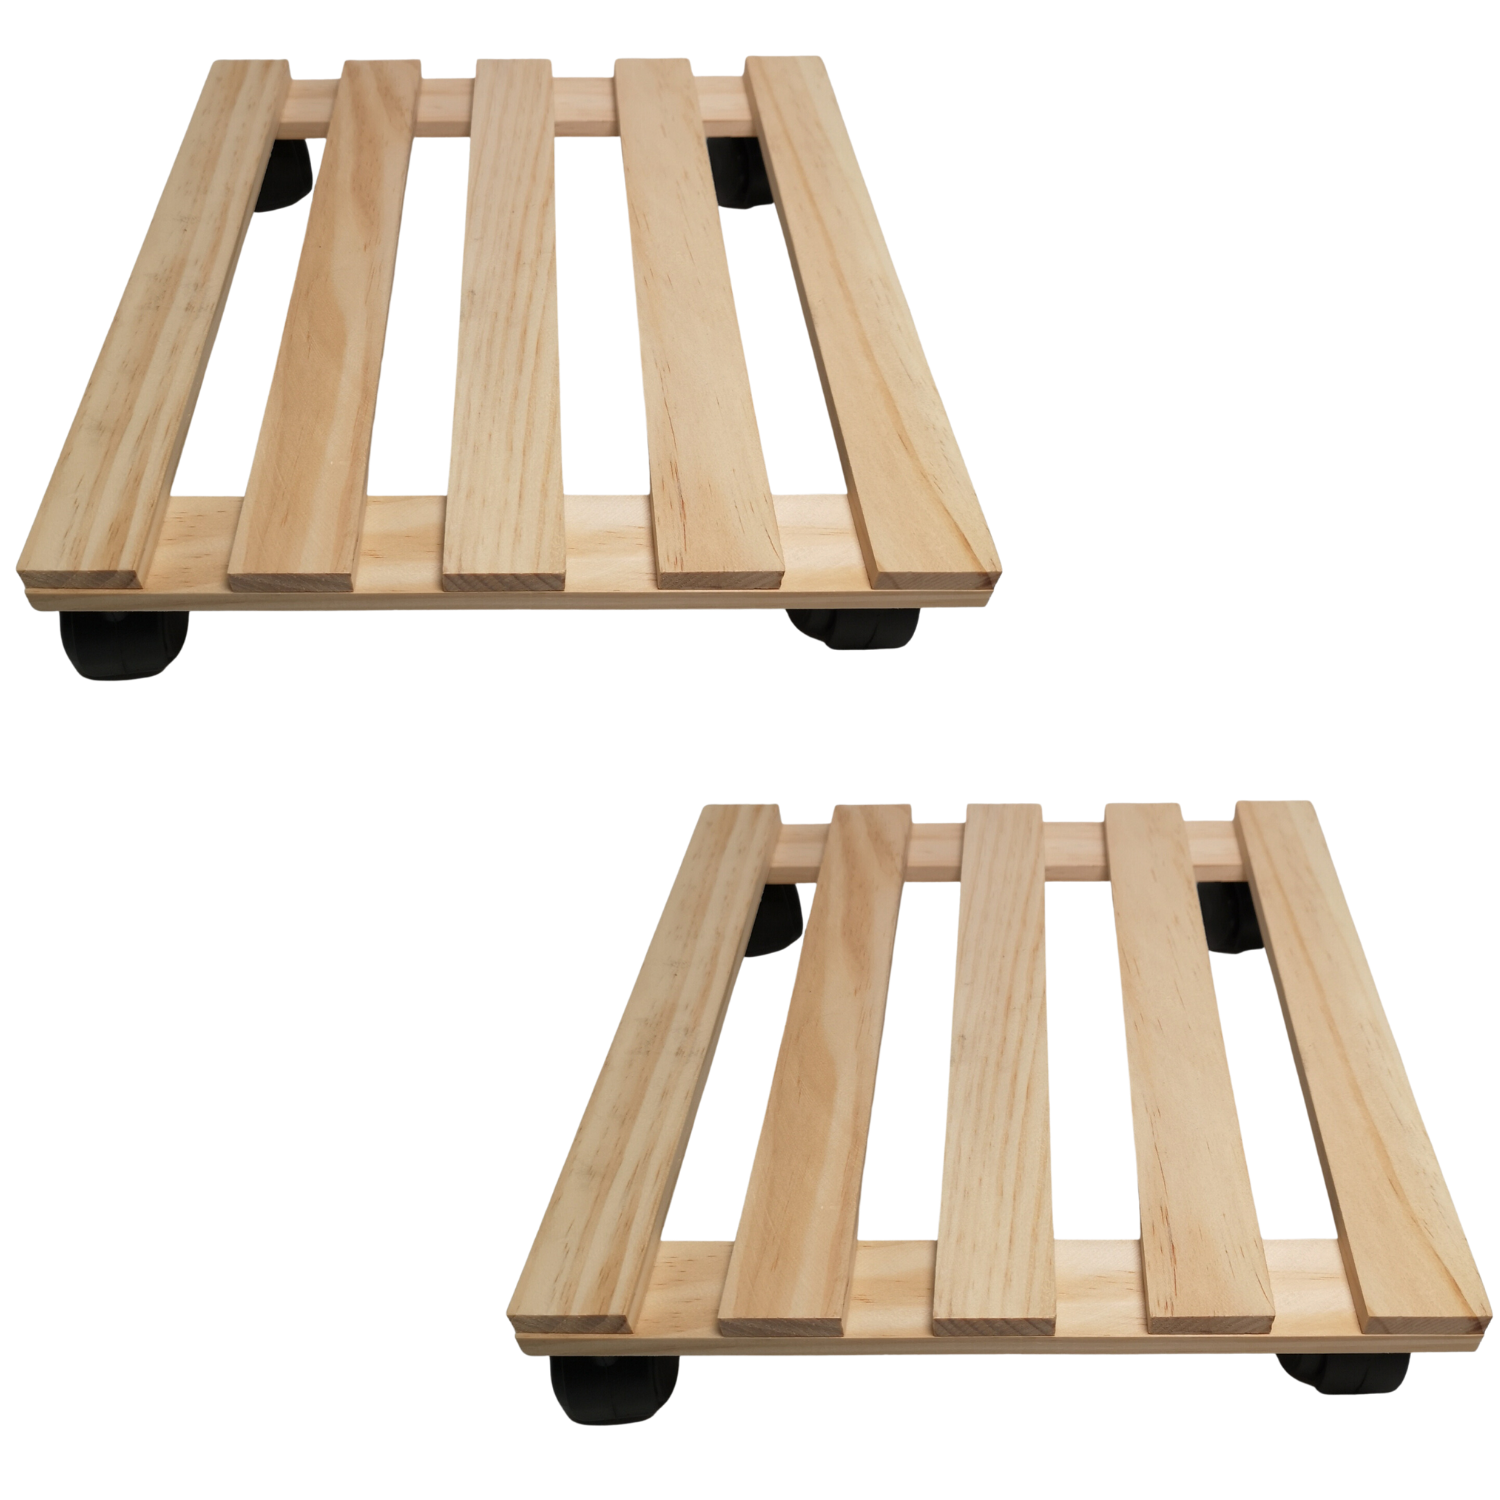 Pack of 2 35cm Square Wooden Garden Plant Pot Flower Trolley Stand On Wheels